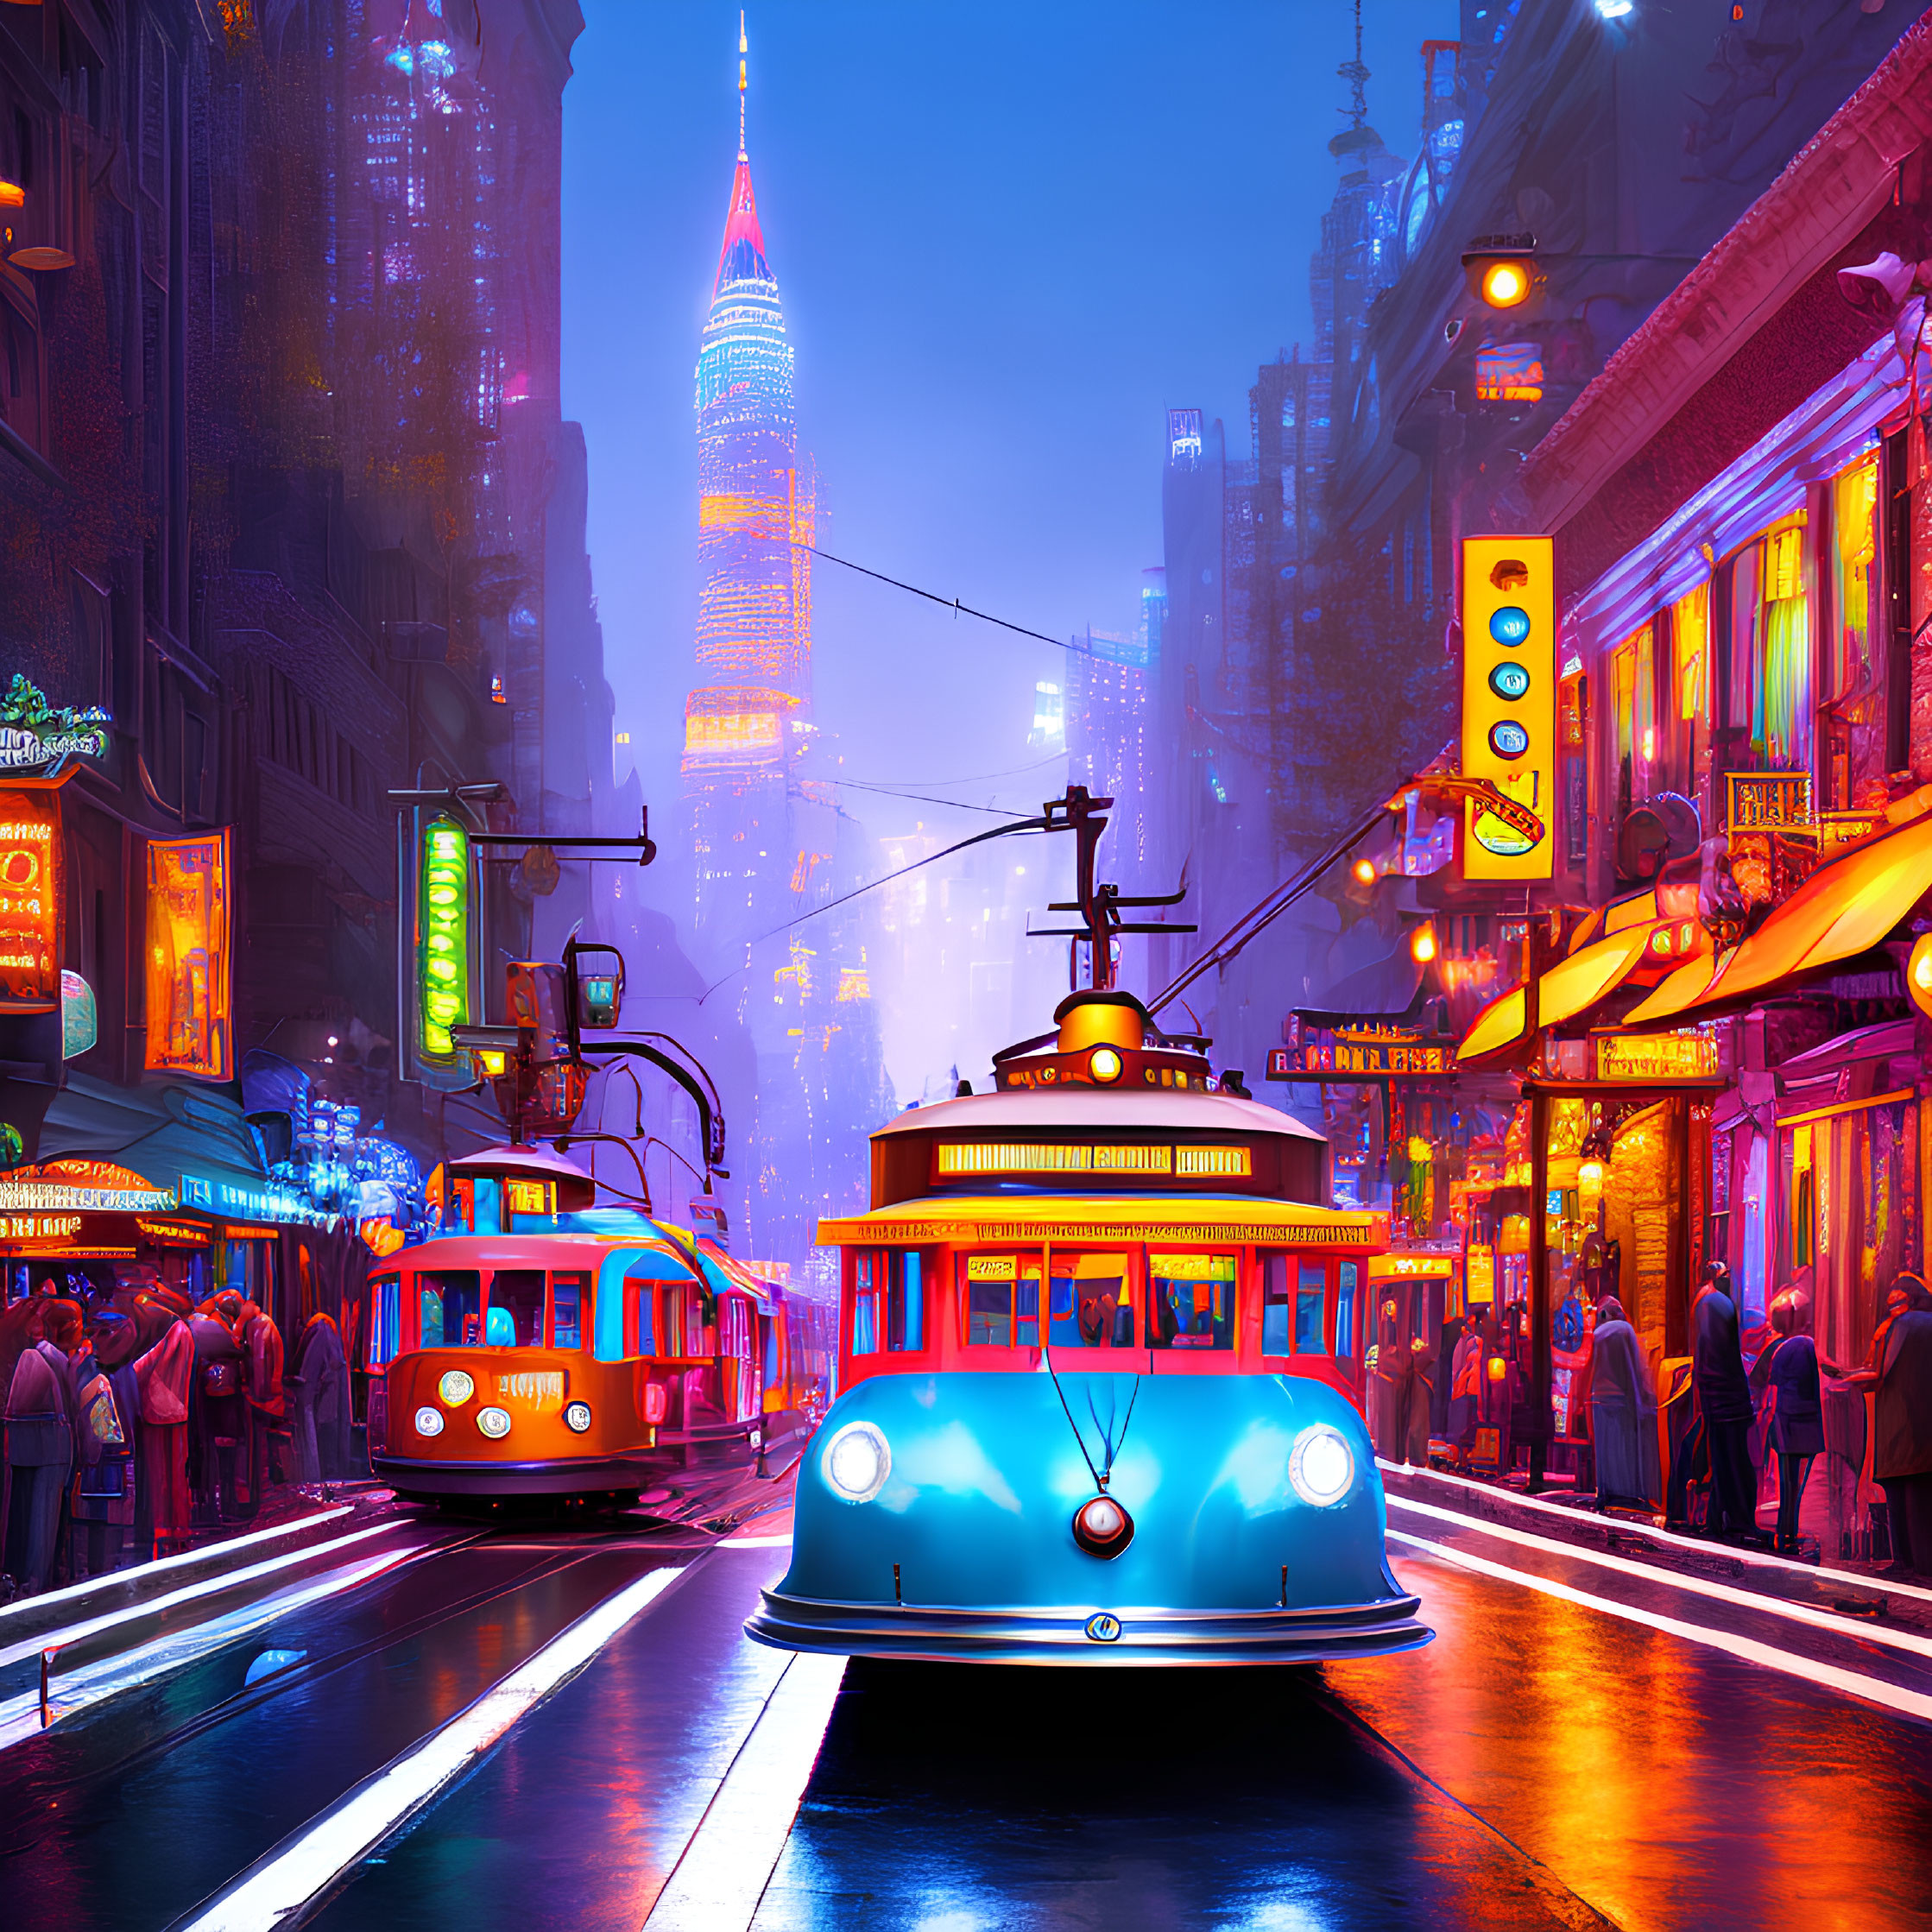 Colorful night cityscape with neon signs, trams, and skyscraper